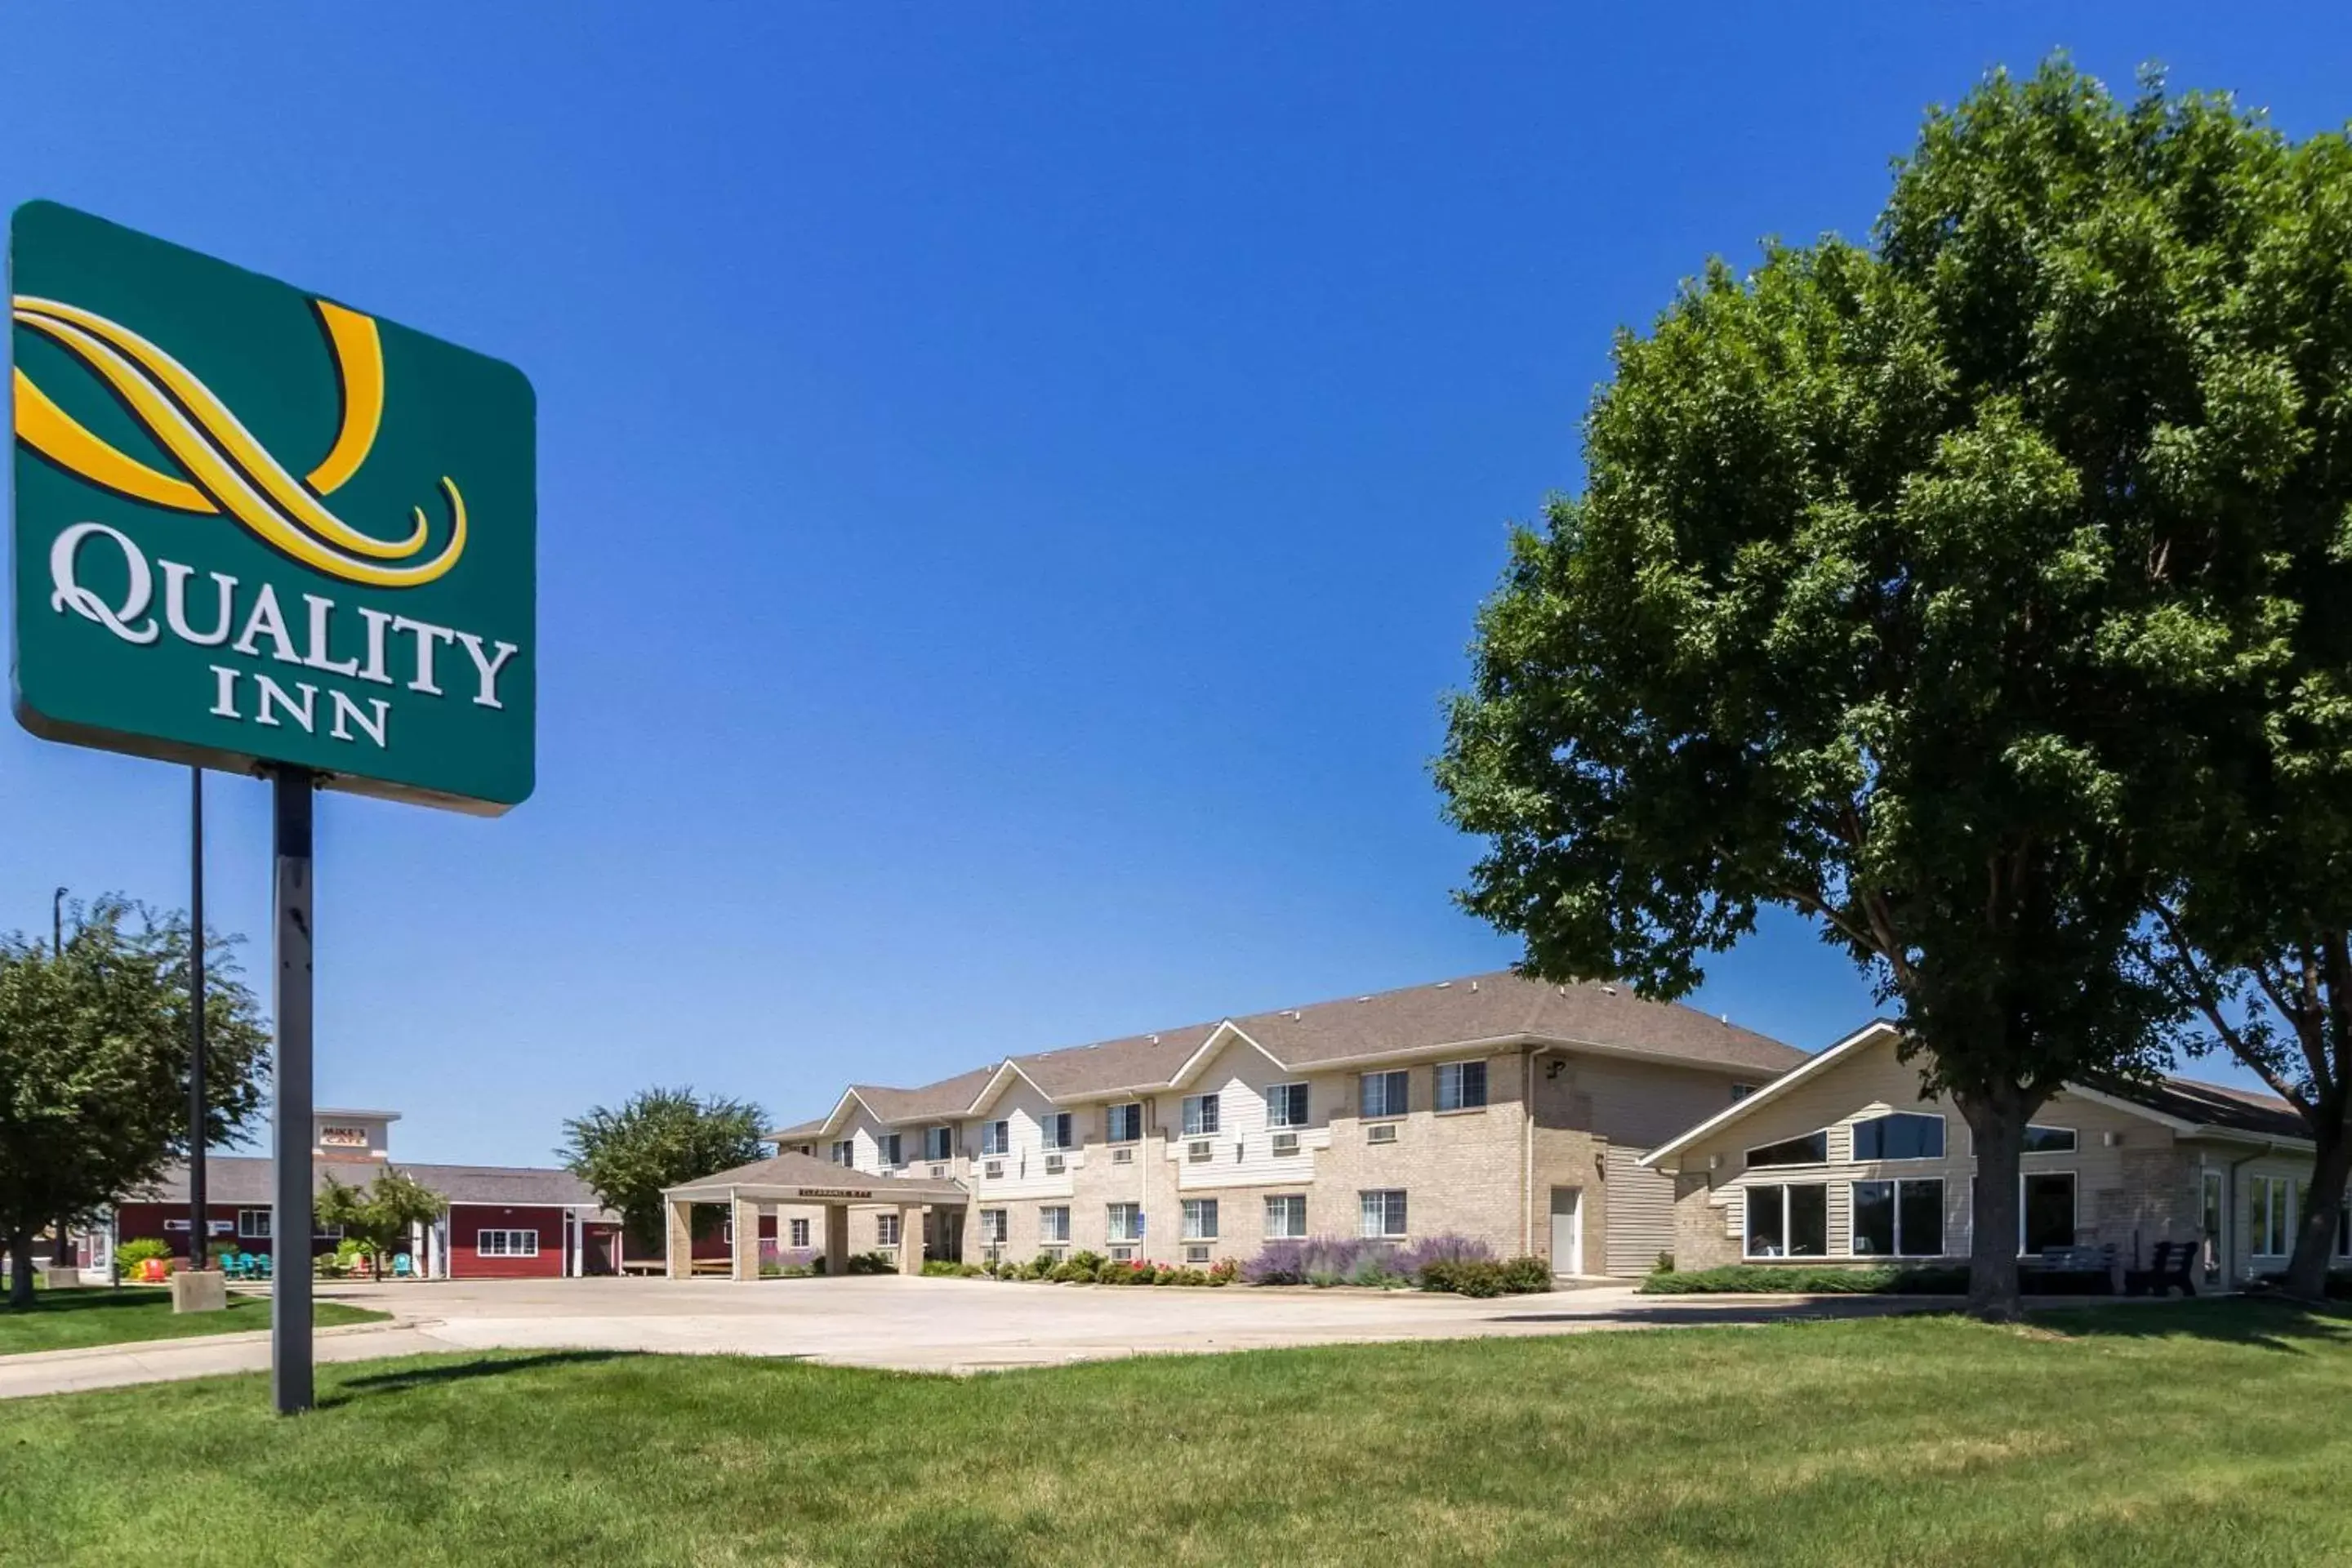 Property building in Quality Inn - Marshall